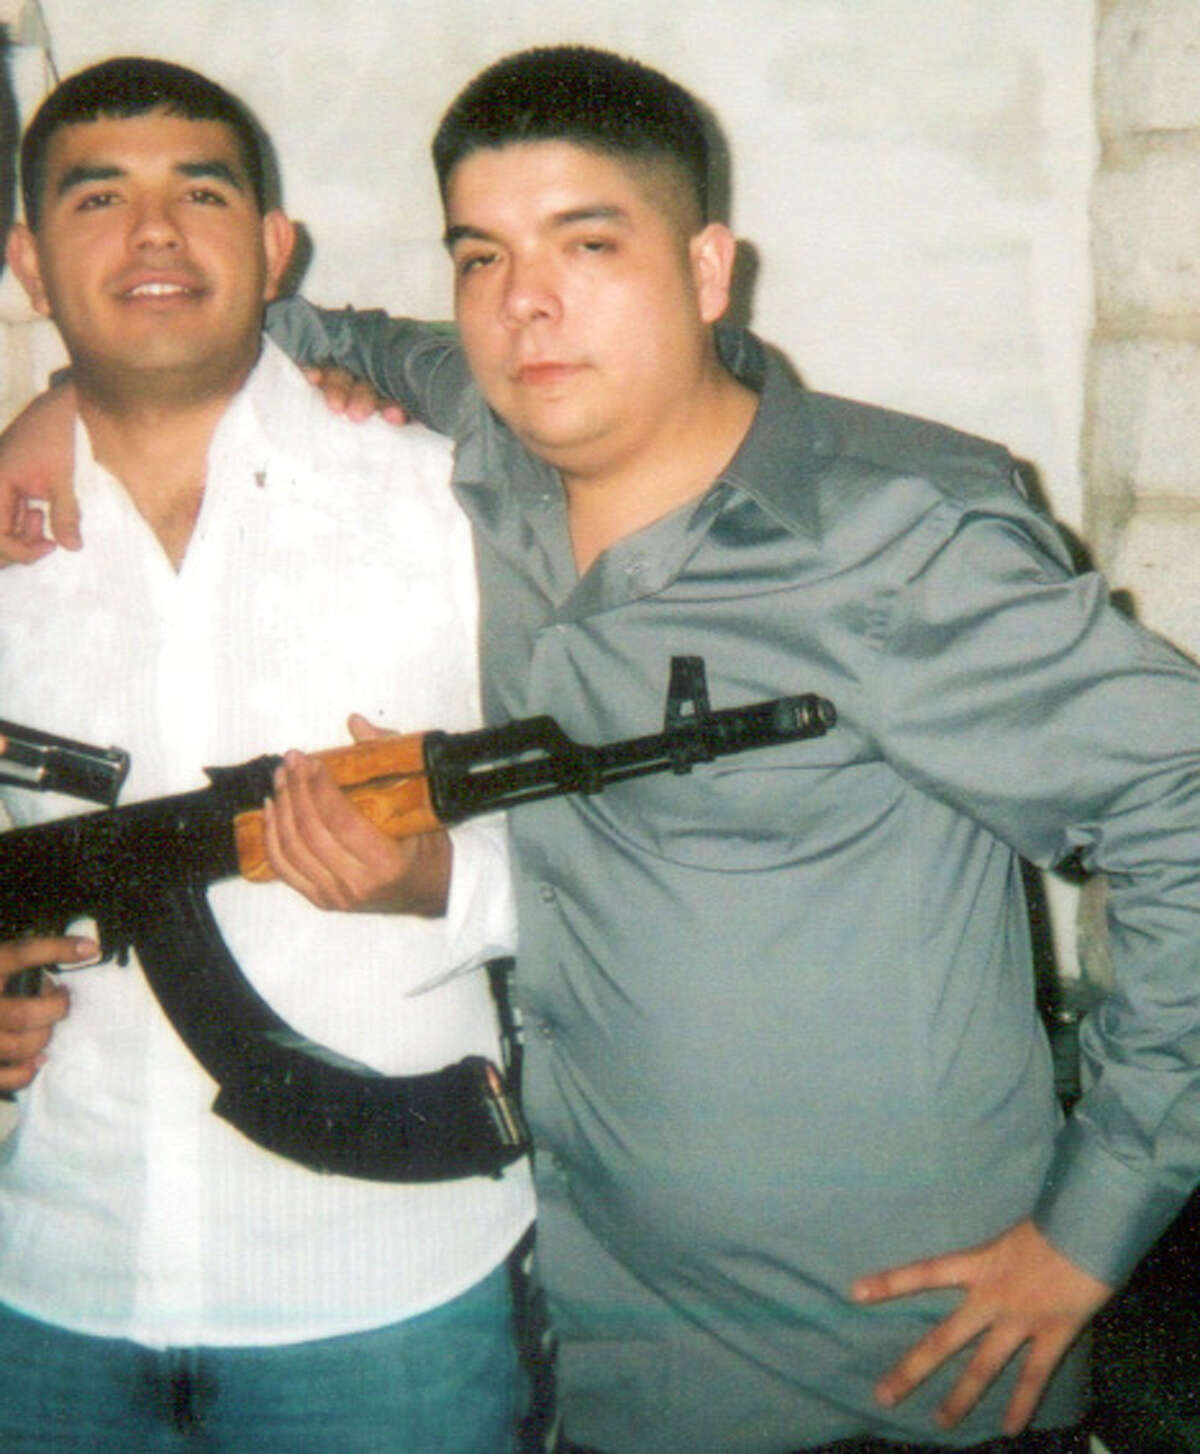 Jorge Gomez (left) was identified in a 2009 trial as a Zetas operative; police believe that he is dead. Juan Manuel Marquez Rodriguez was sentenced to prison in connection with two murders tied to the cartel.